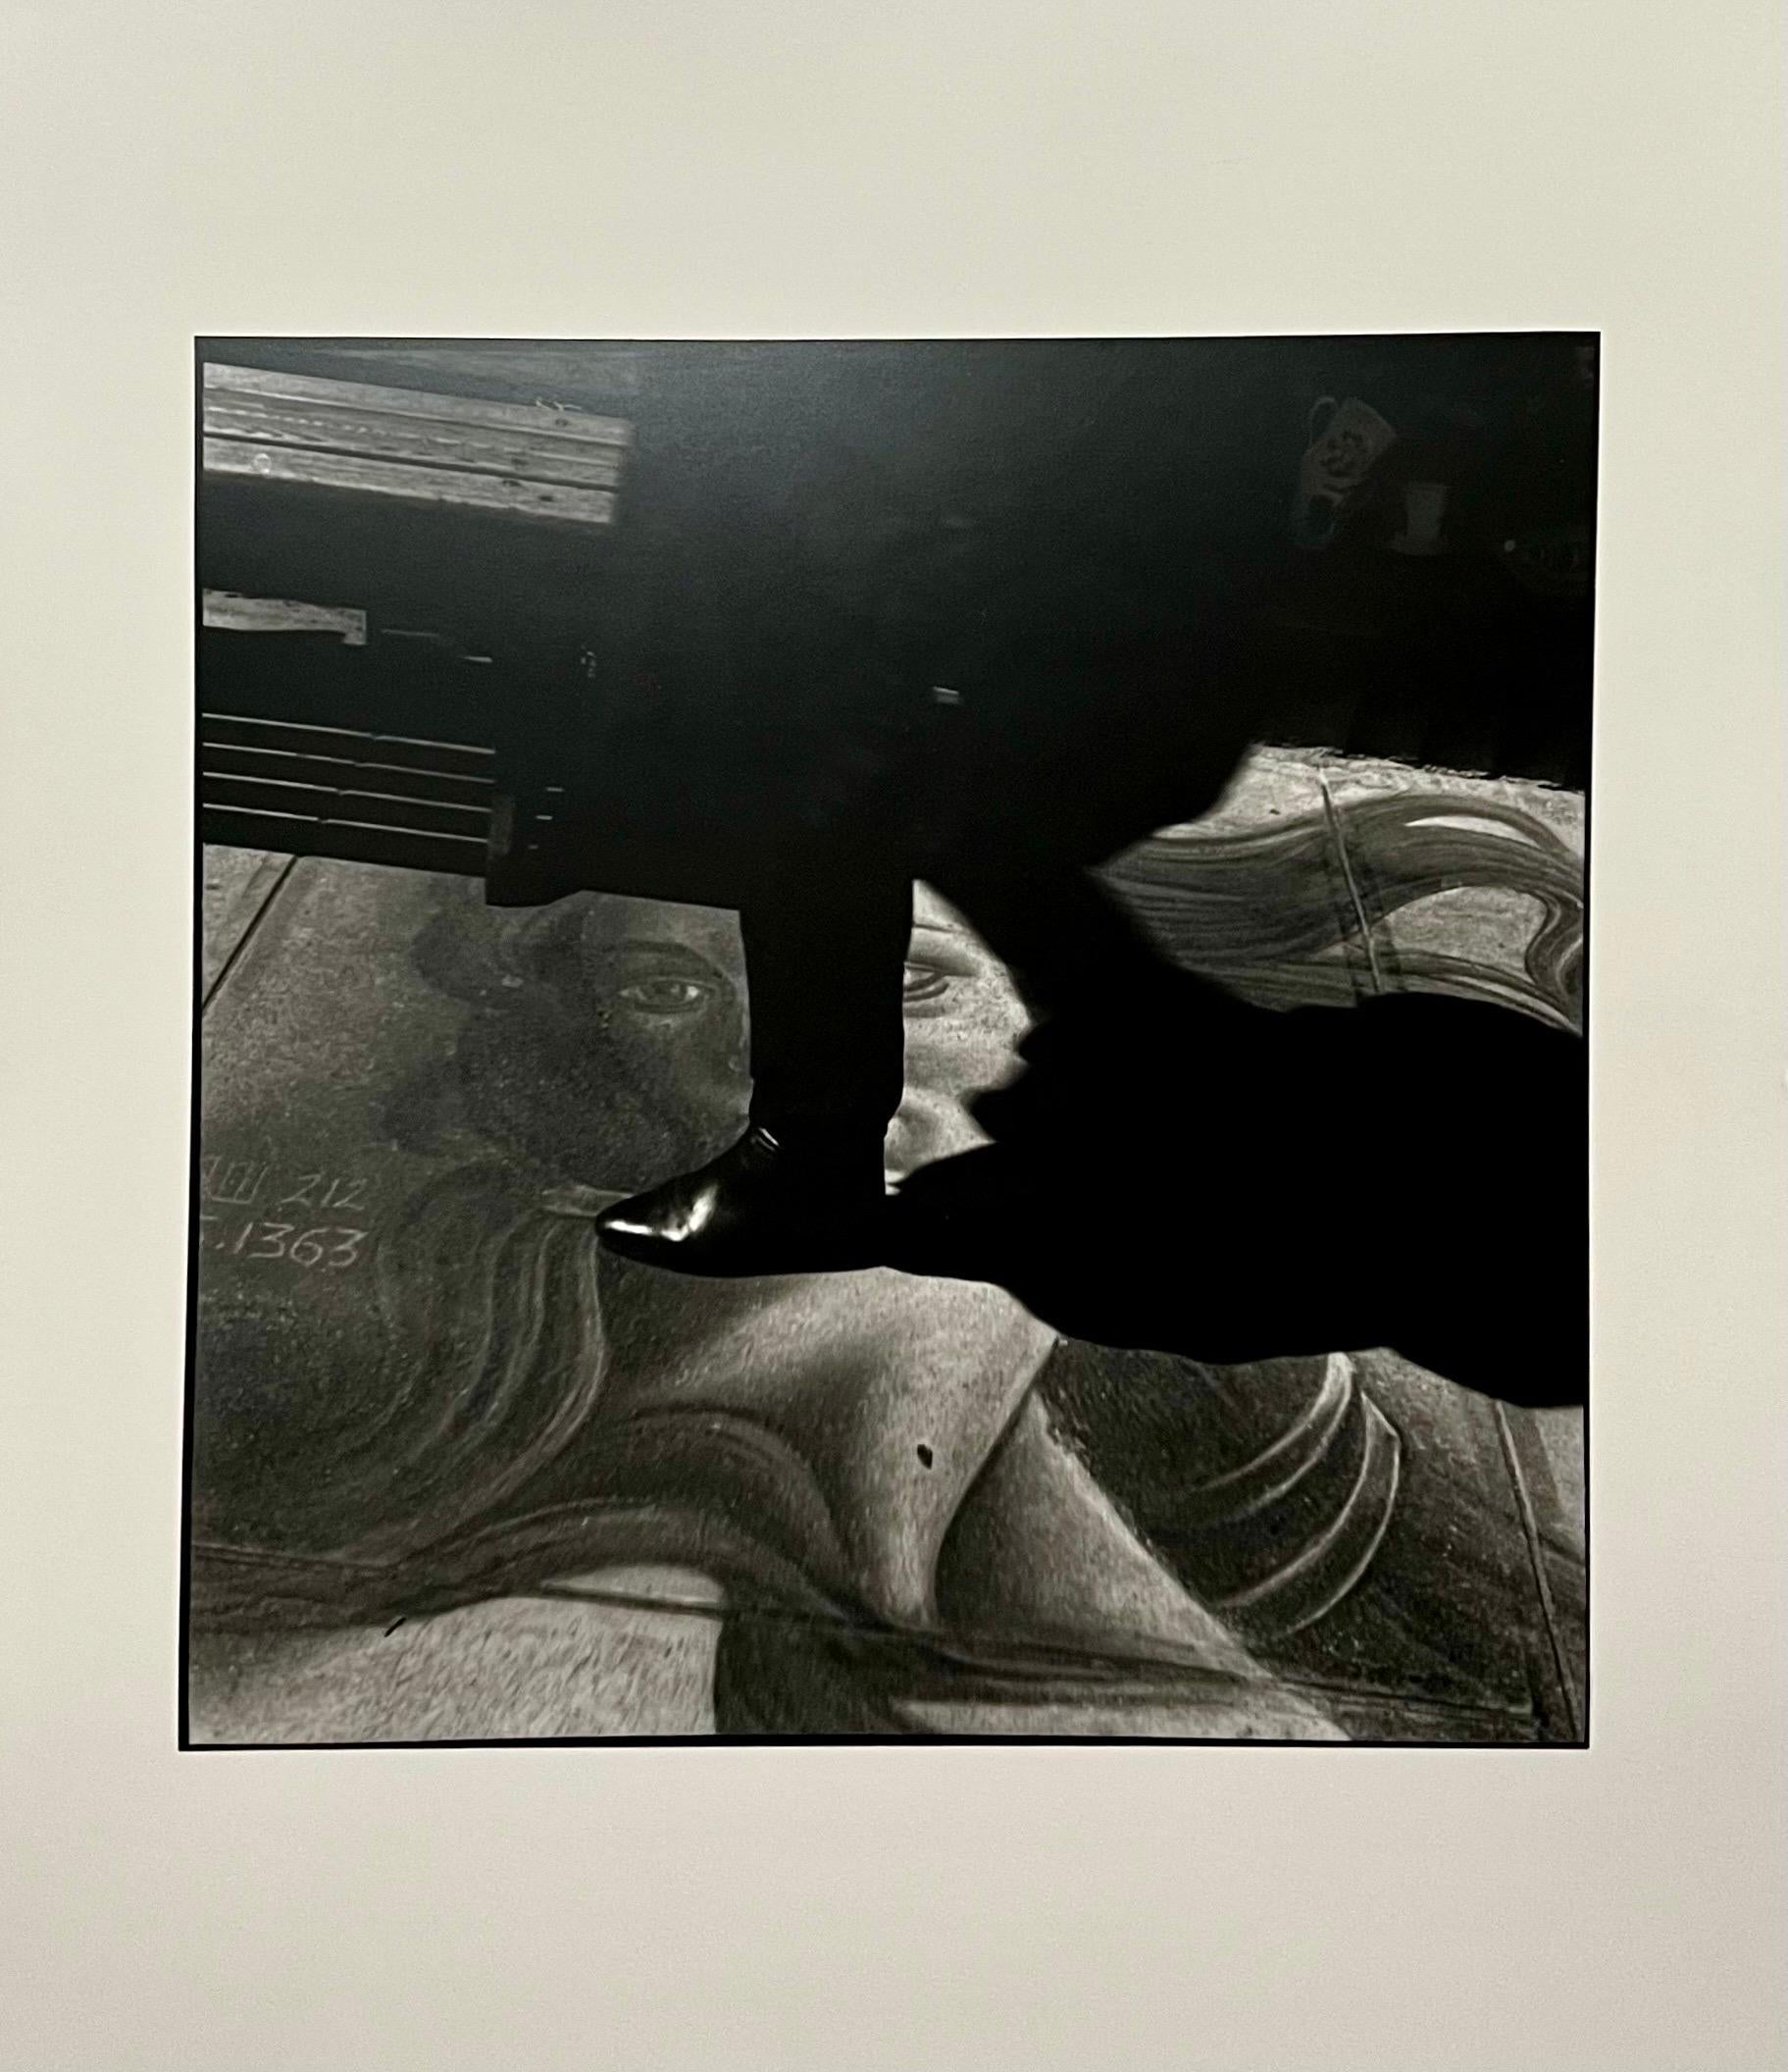 Bruce Cratsley, American (1944-1998)
Vintage gelatin silver print
Street Art
A surrealist image of a man walking over a Sandro Botticelli chalk drawing in a NYC park
Hand signed, titled and dated 1989 verso
image (each): 15 1/4 x 15 1/4 inches,